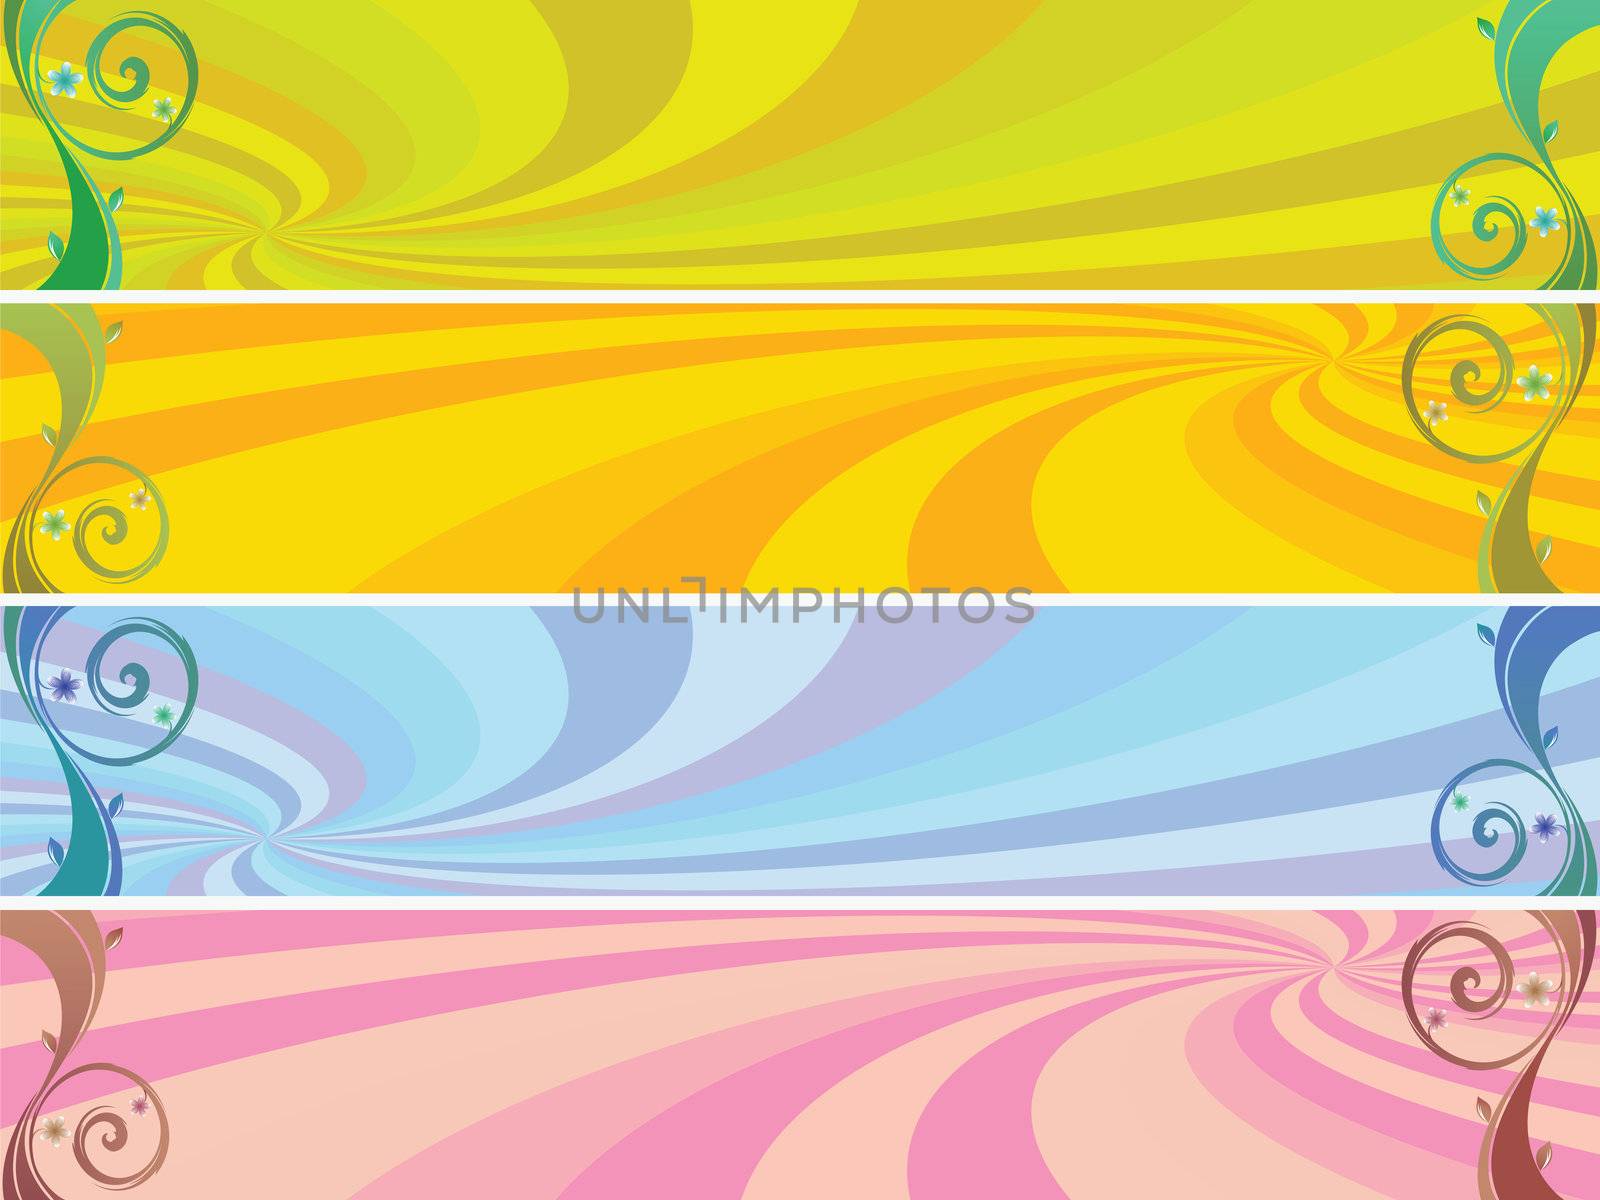 colored headers background, abstract vector art illustration